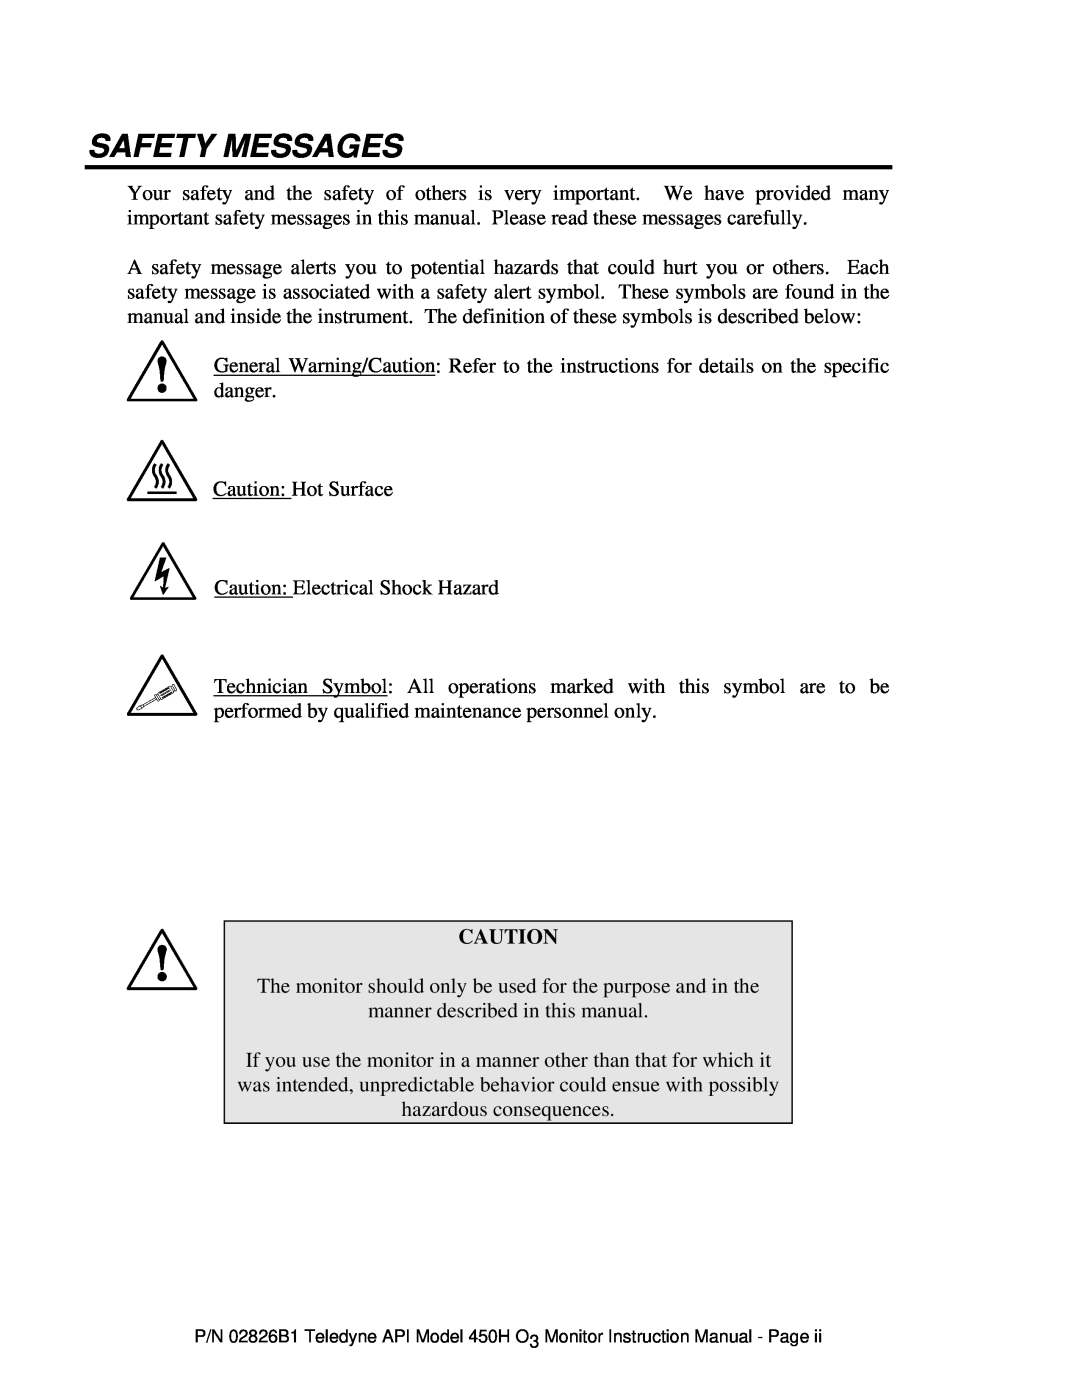 Teledyne 450H instruction manual Safety Messages 